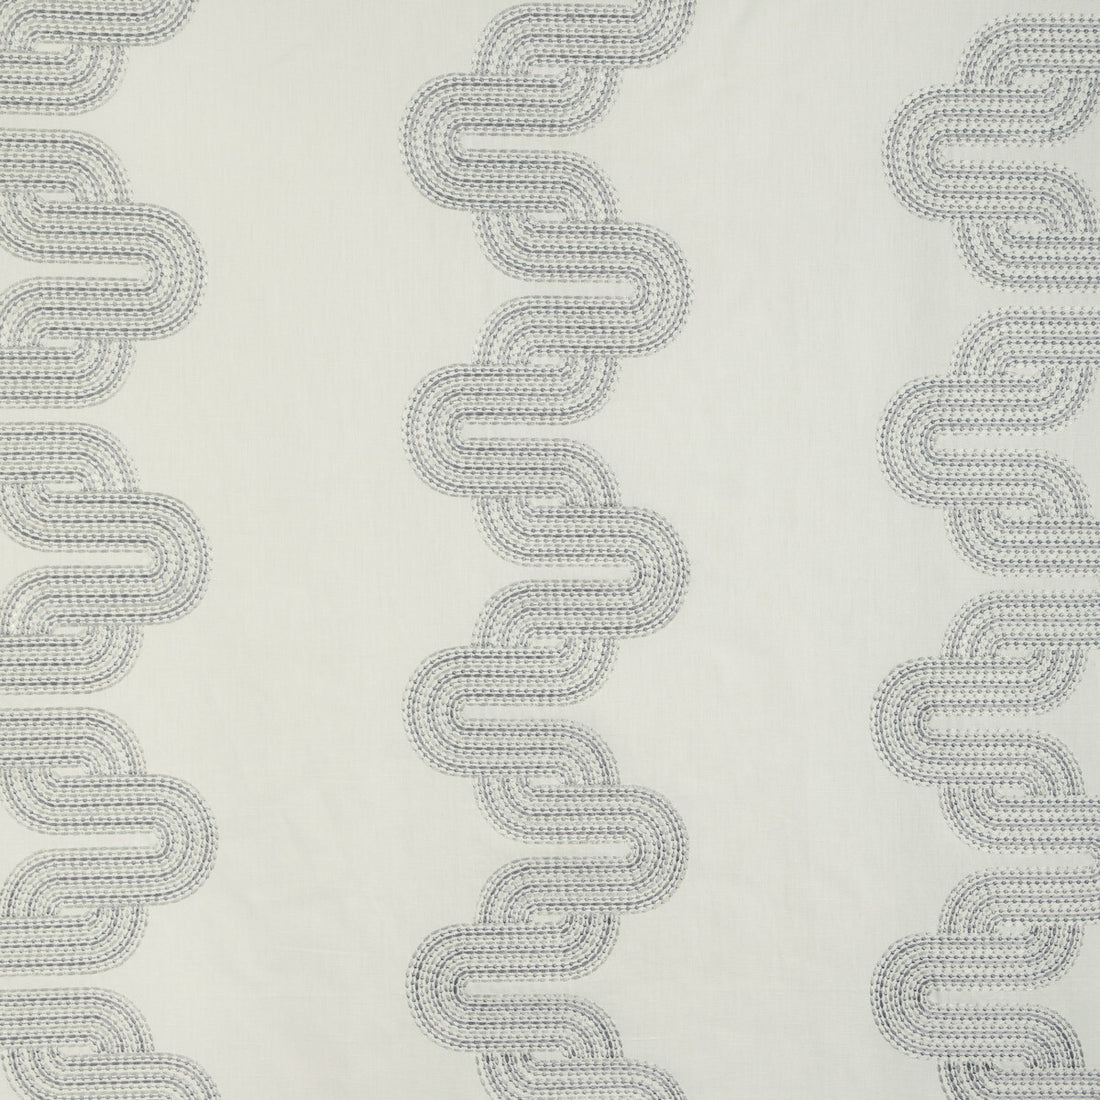 Cloud Chain fabric in grey color - pattern 36943.11.0 - by Kravet Design in the Alexa Hampton collection